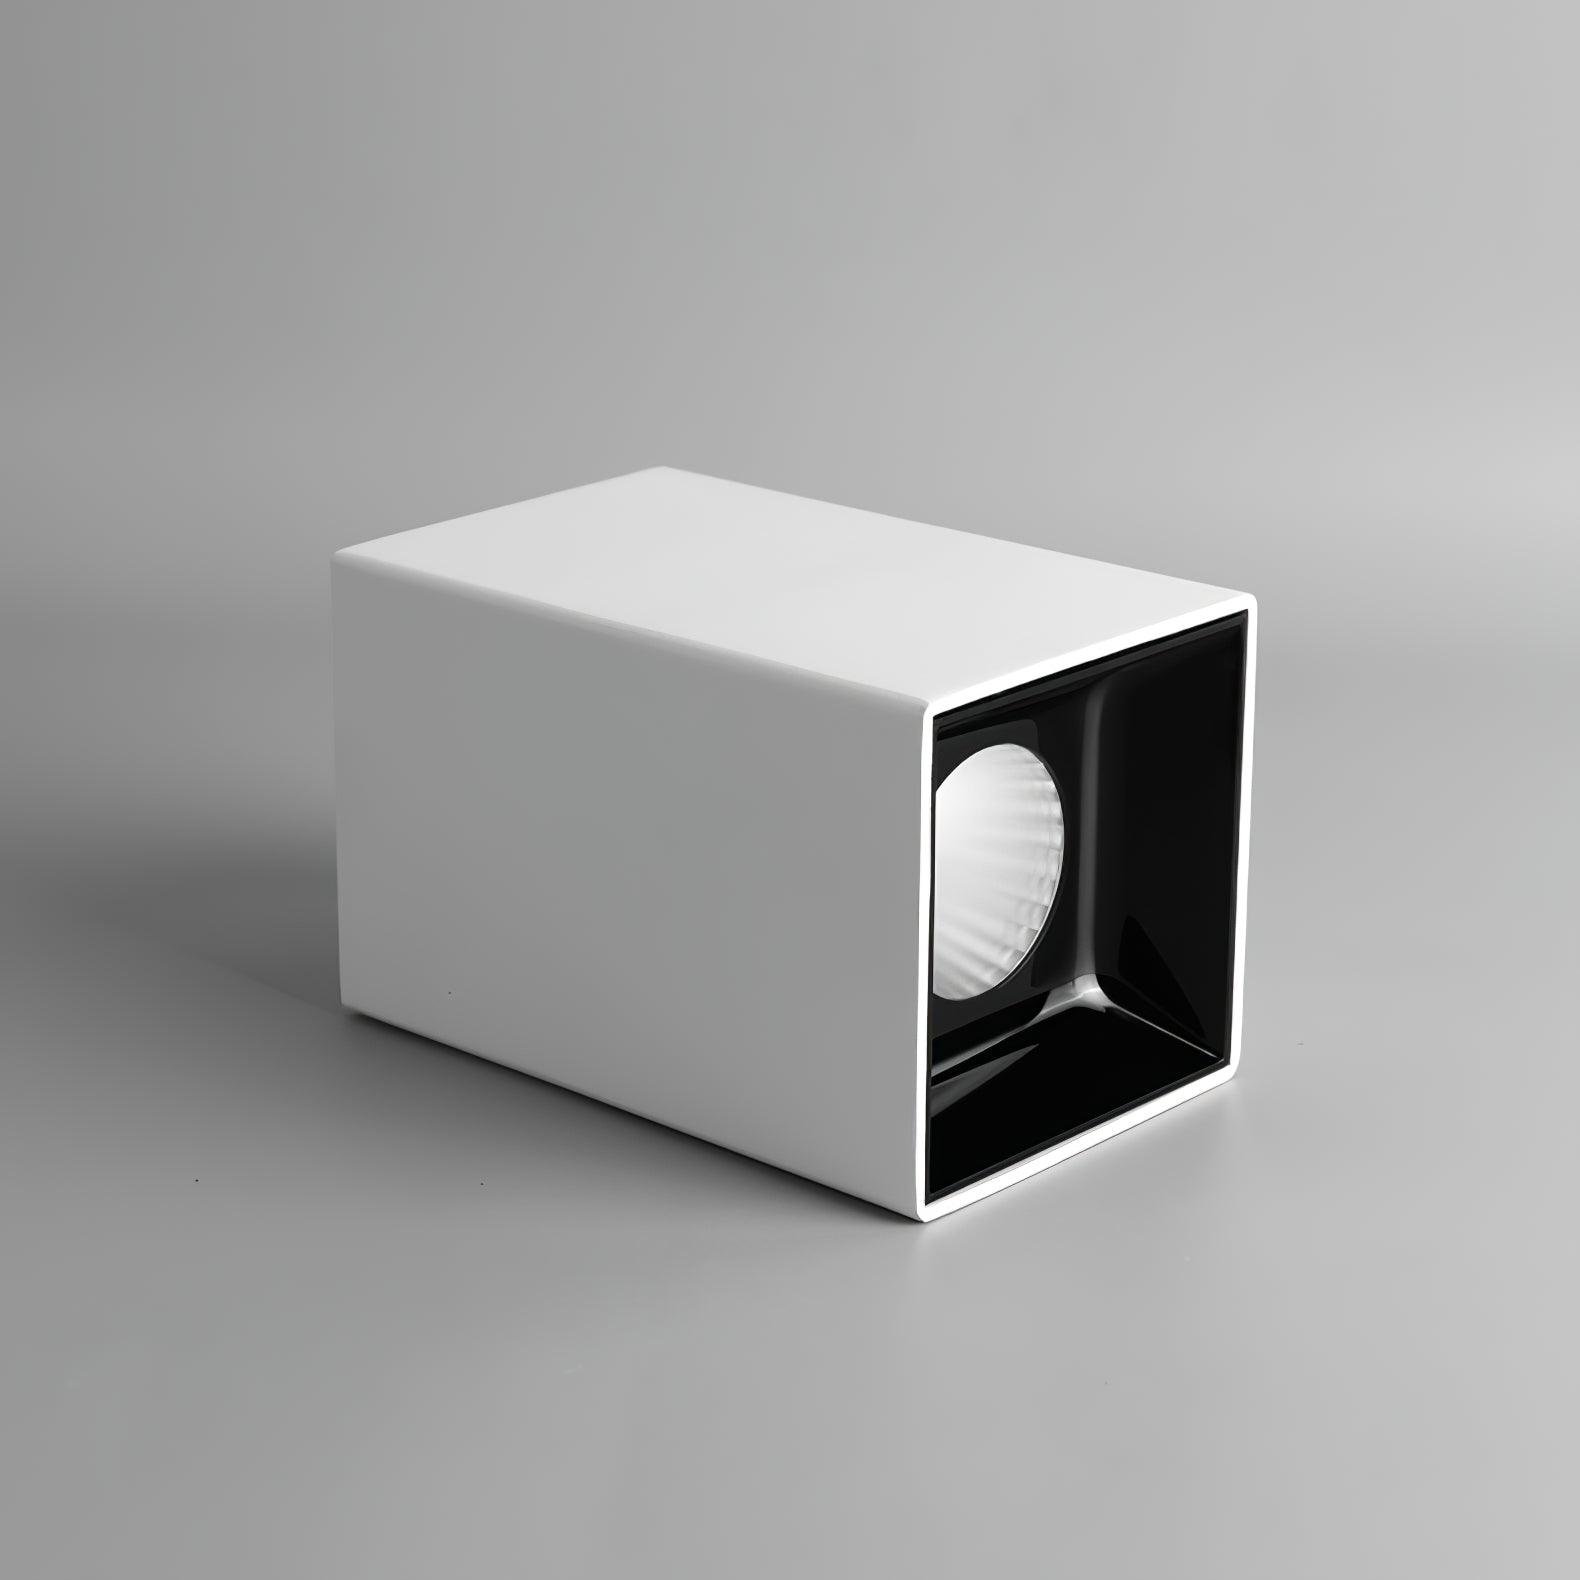 Set of 10 Cool Light White Cube Spotlights measuring 3.7" in Diameter and 4.1" in Height